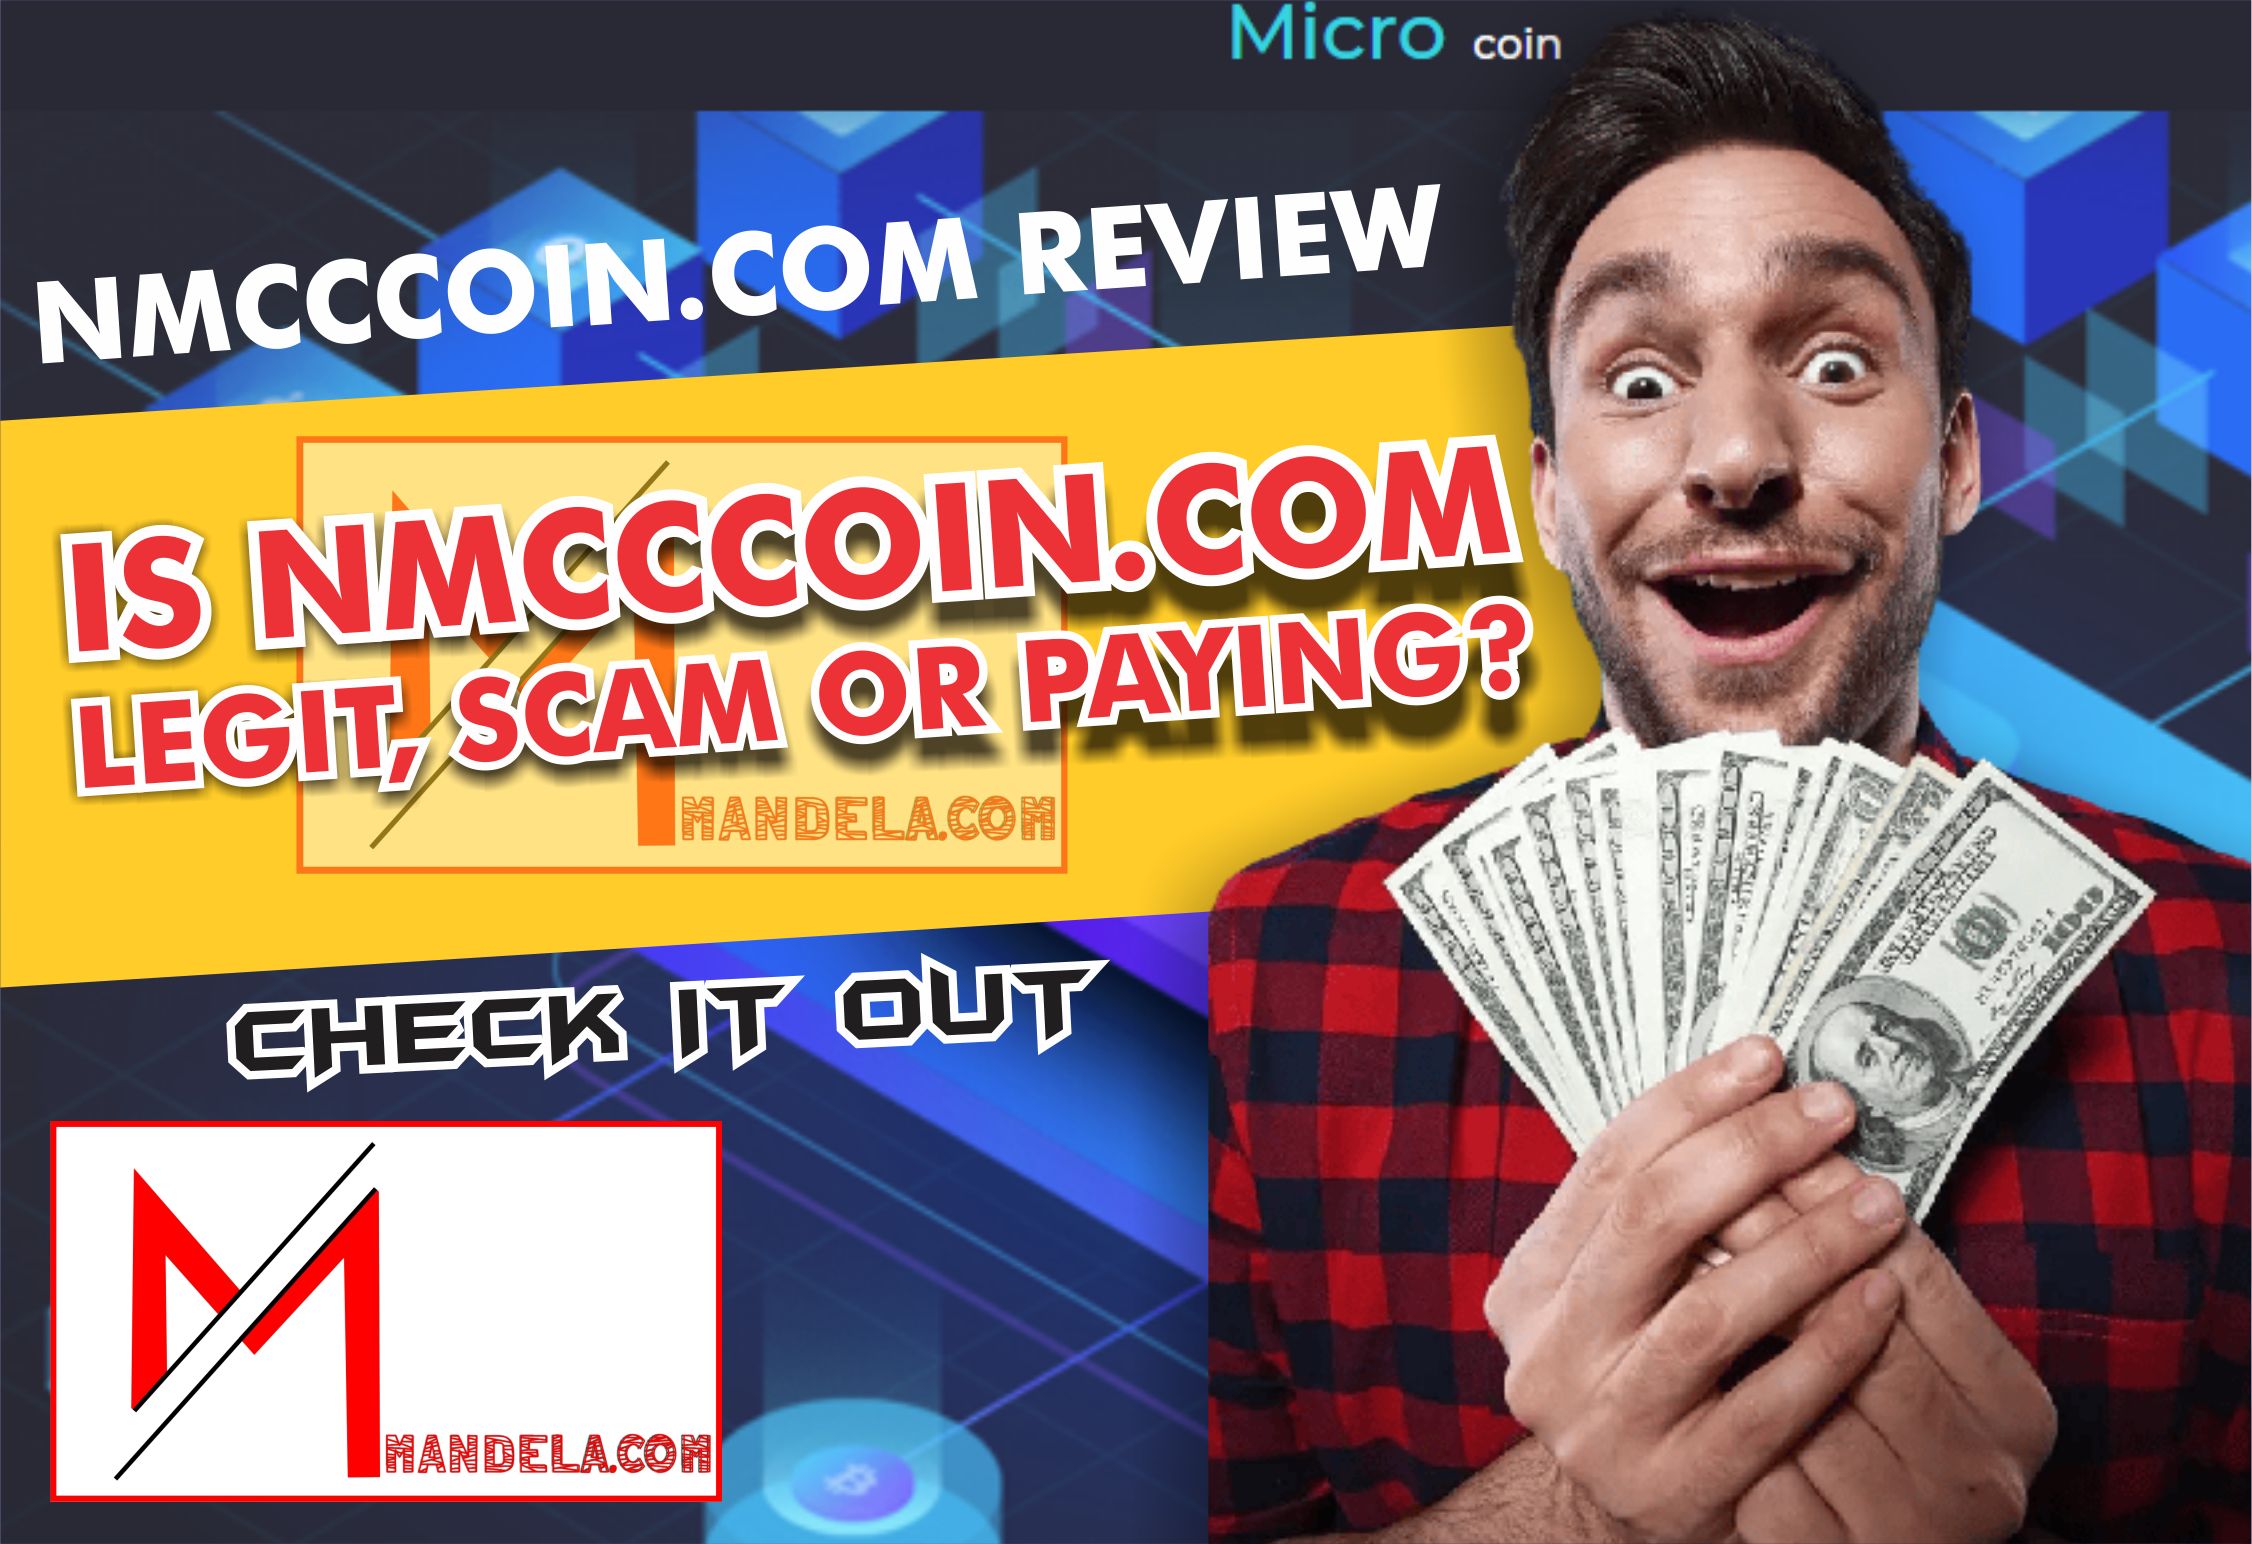 Nmcccoin.com Review (Nmcccoin Legit, Scam or Paying?)